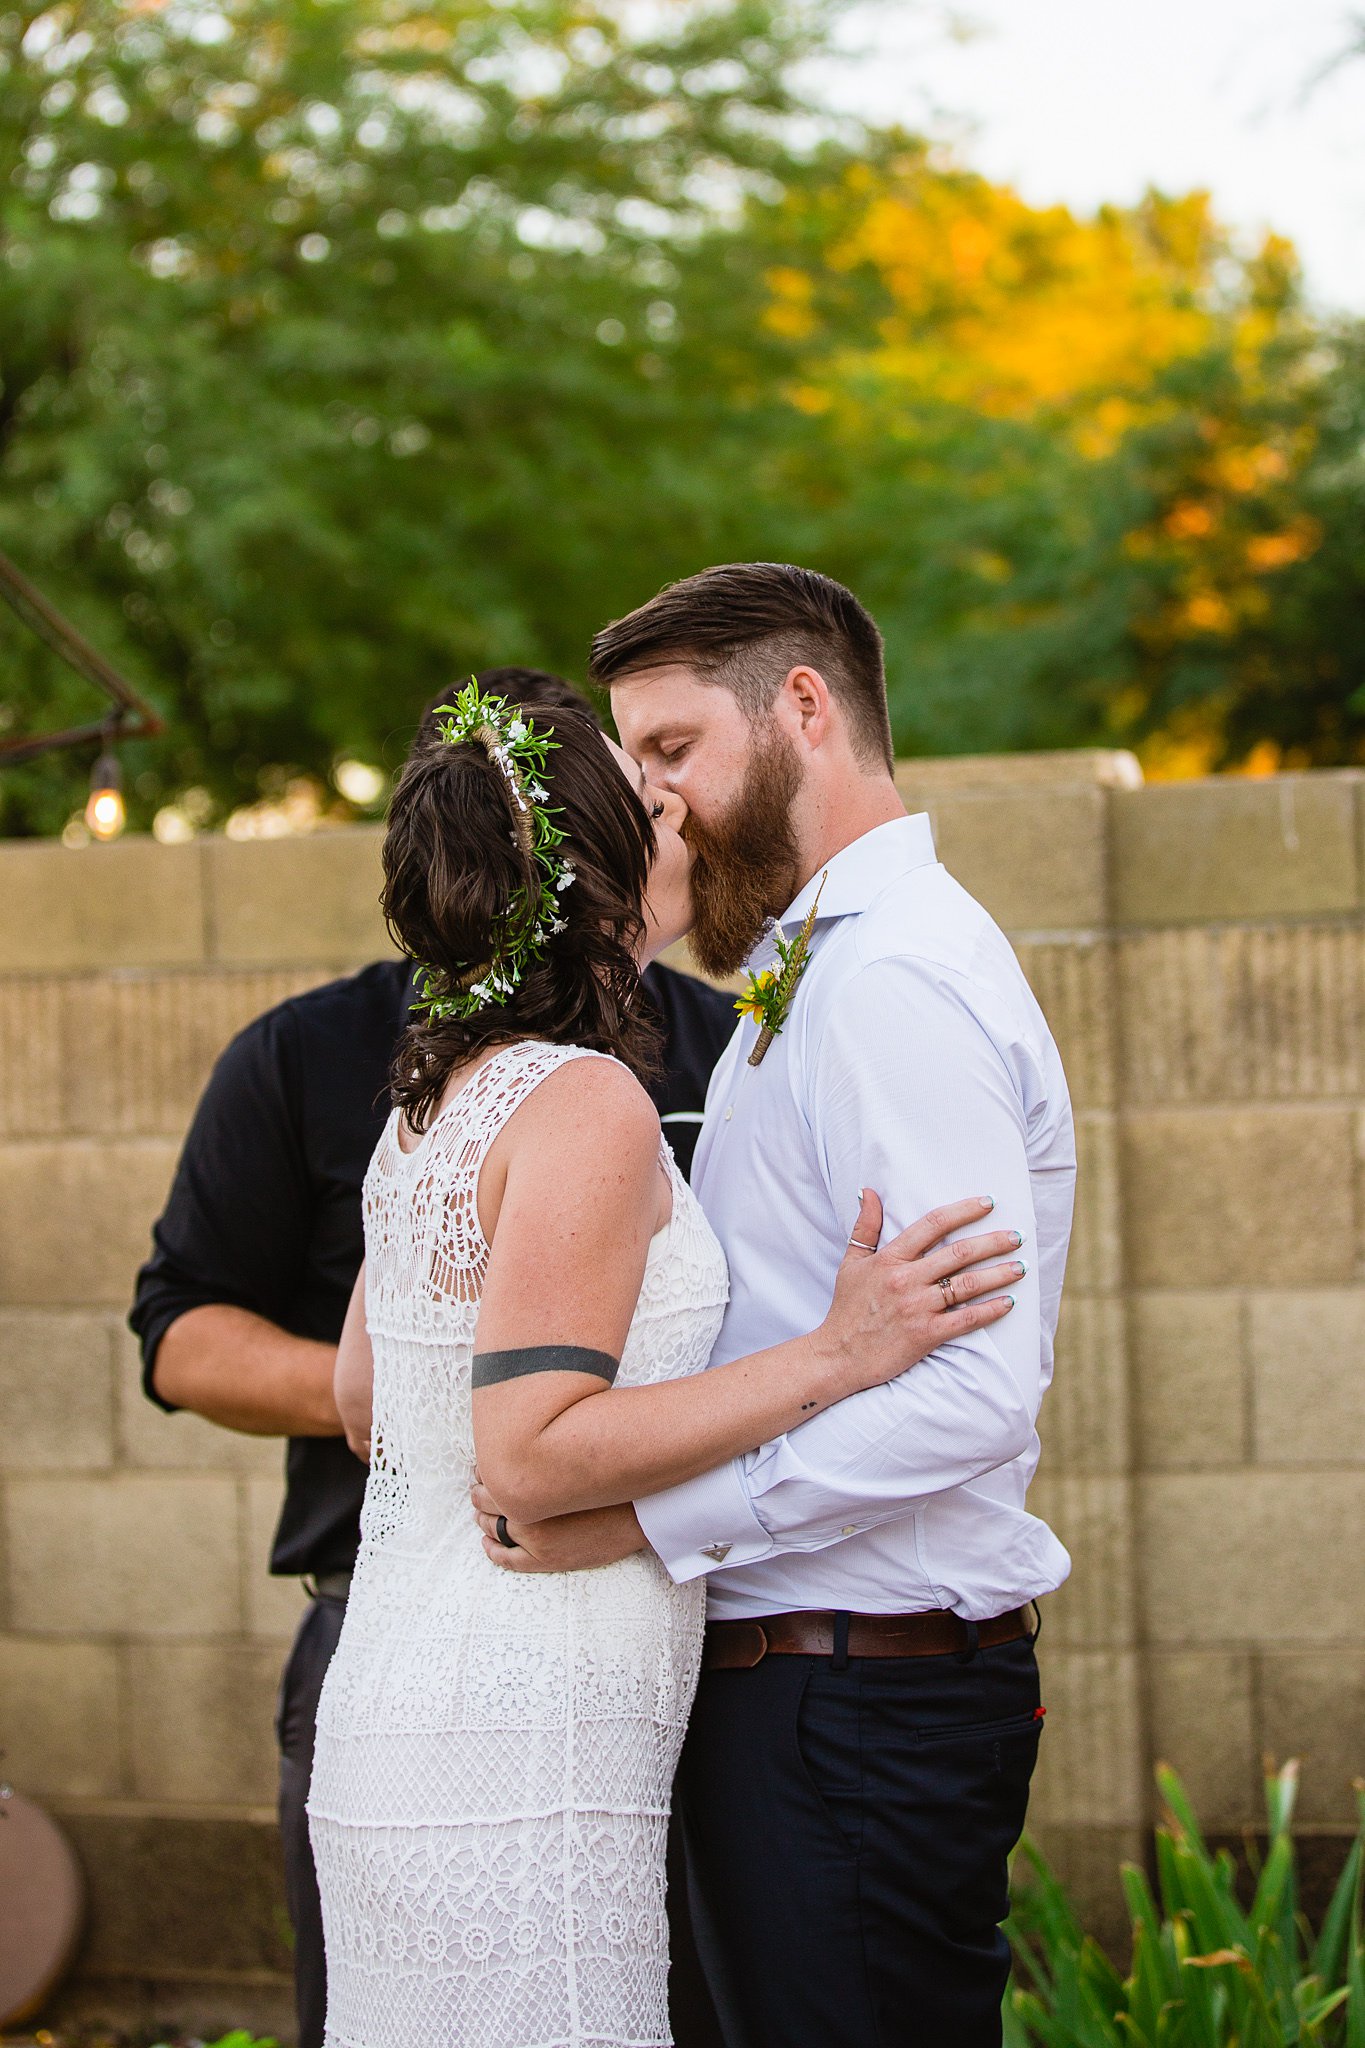 Bride and groom share their first kiss at their backyard garden wedding ceremony by PMA Photography.